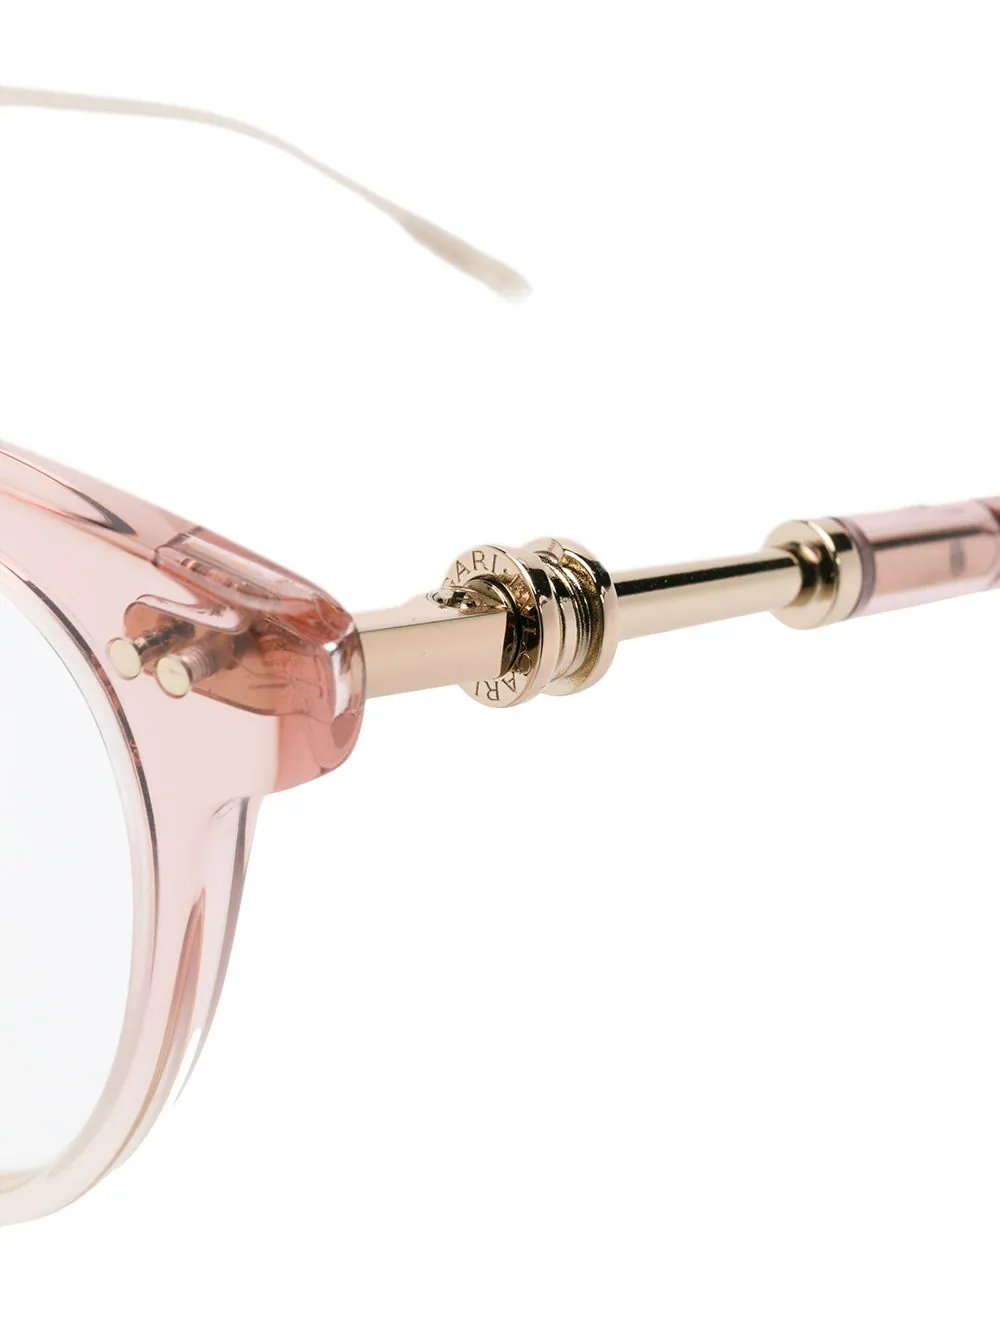 eyewear from the Bvlgari brand will suit even the most demanding buyers